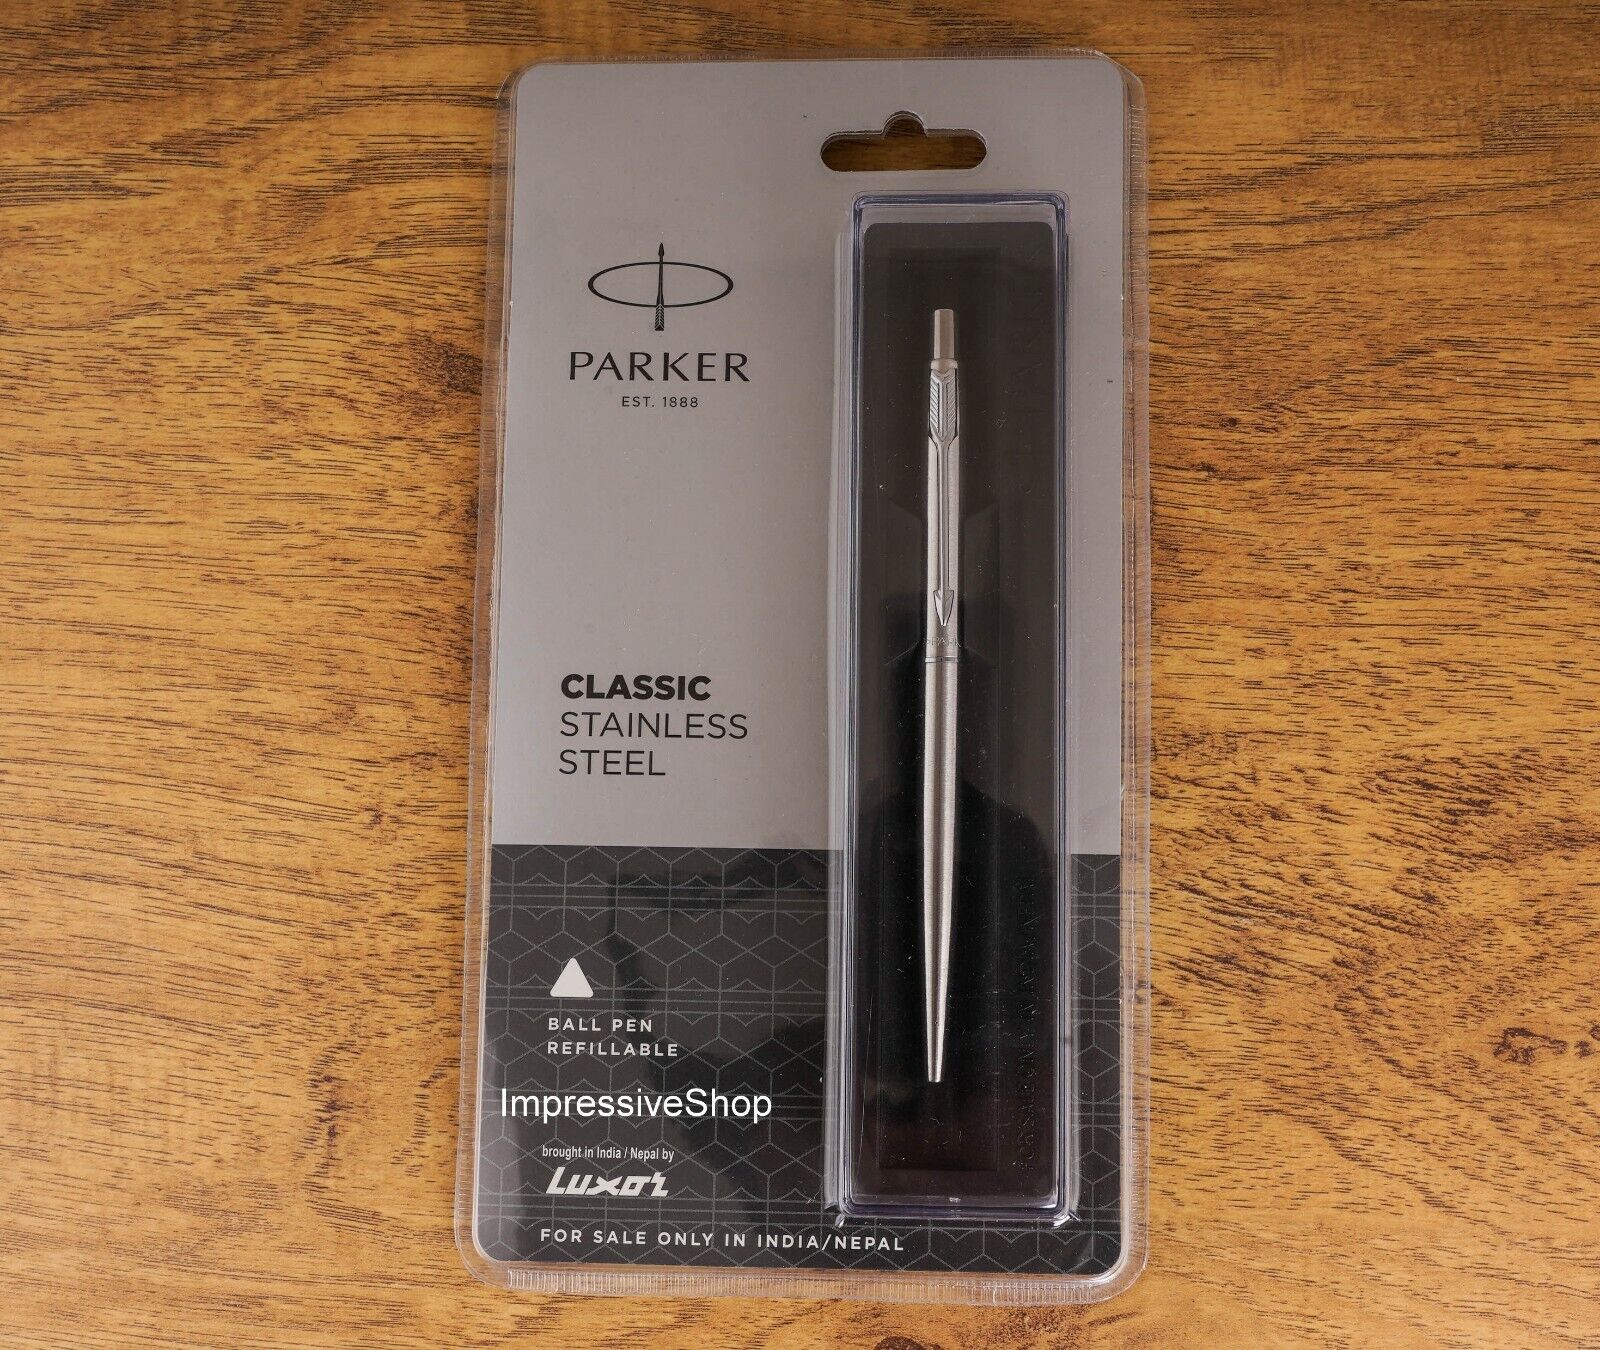 Parker Classic Stainless Steel CT Trim Ball Pen With Free Reynolds Ball pen